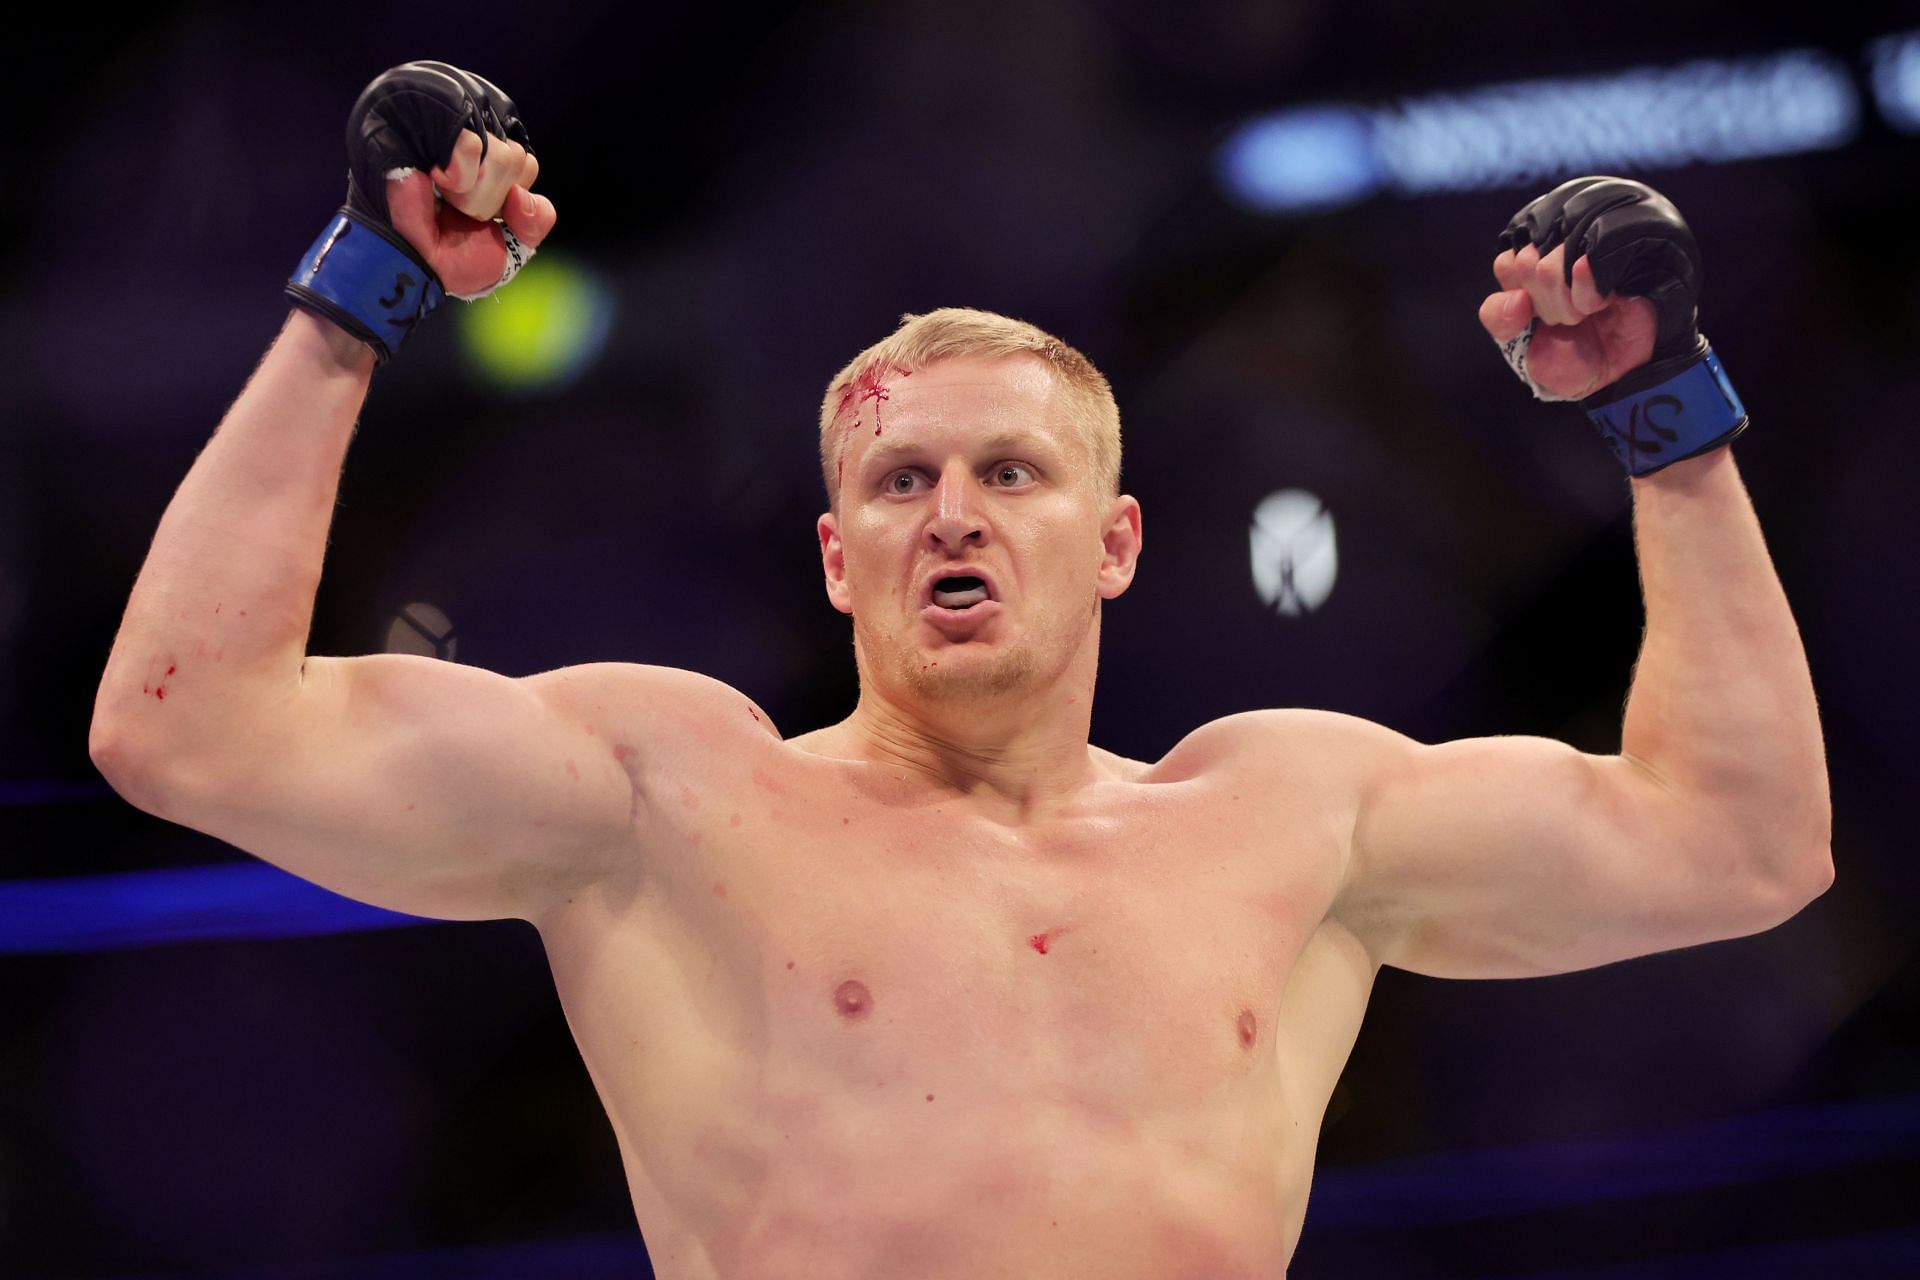 Sergei Pavlovich dispatched Tai Tuivasa in a manner that nobody saw coming